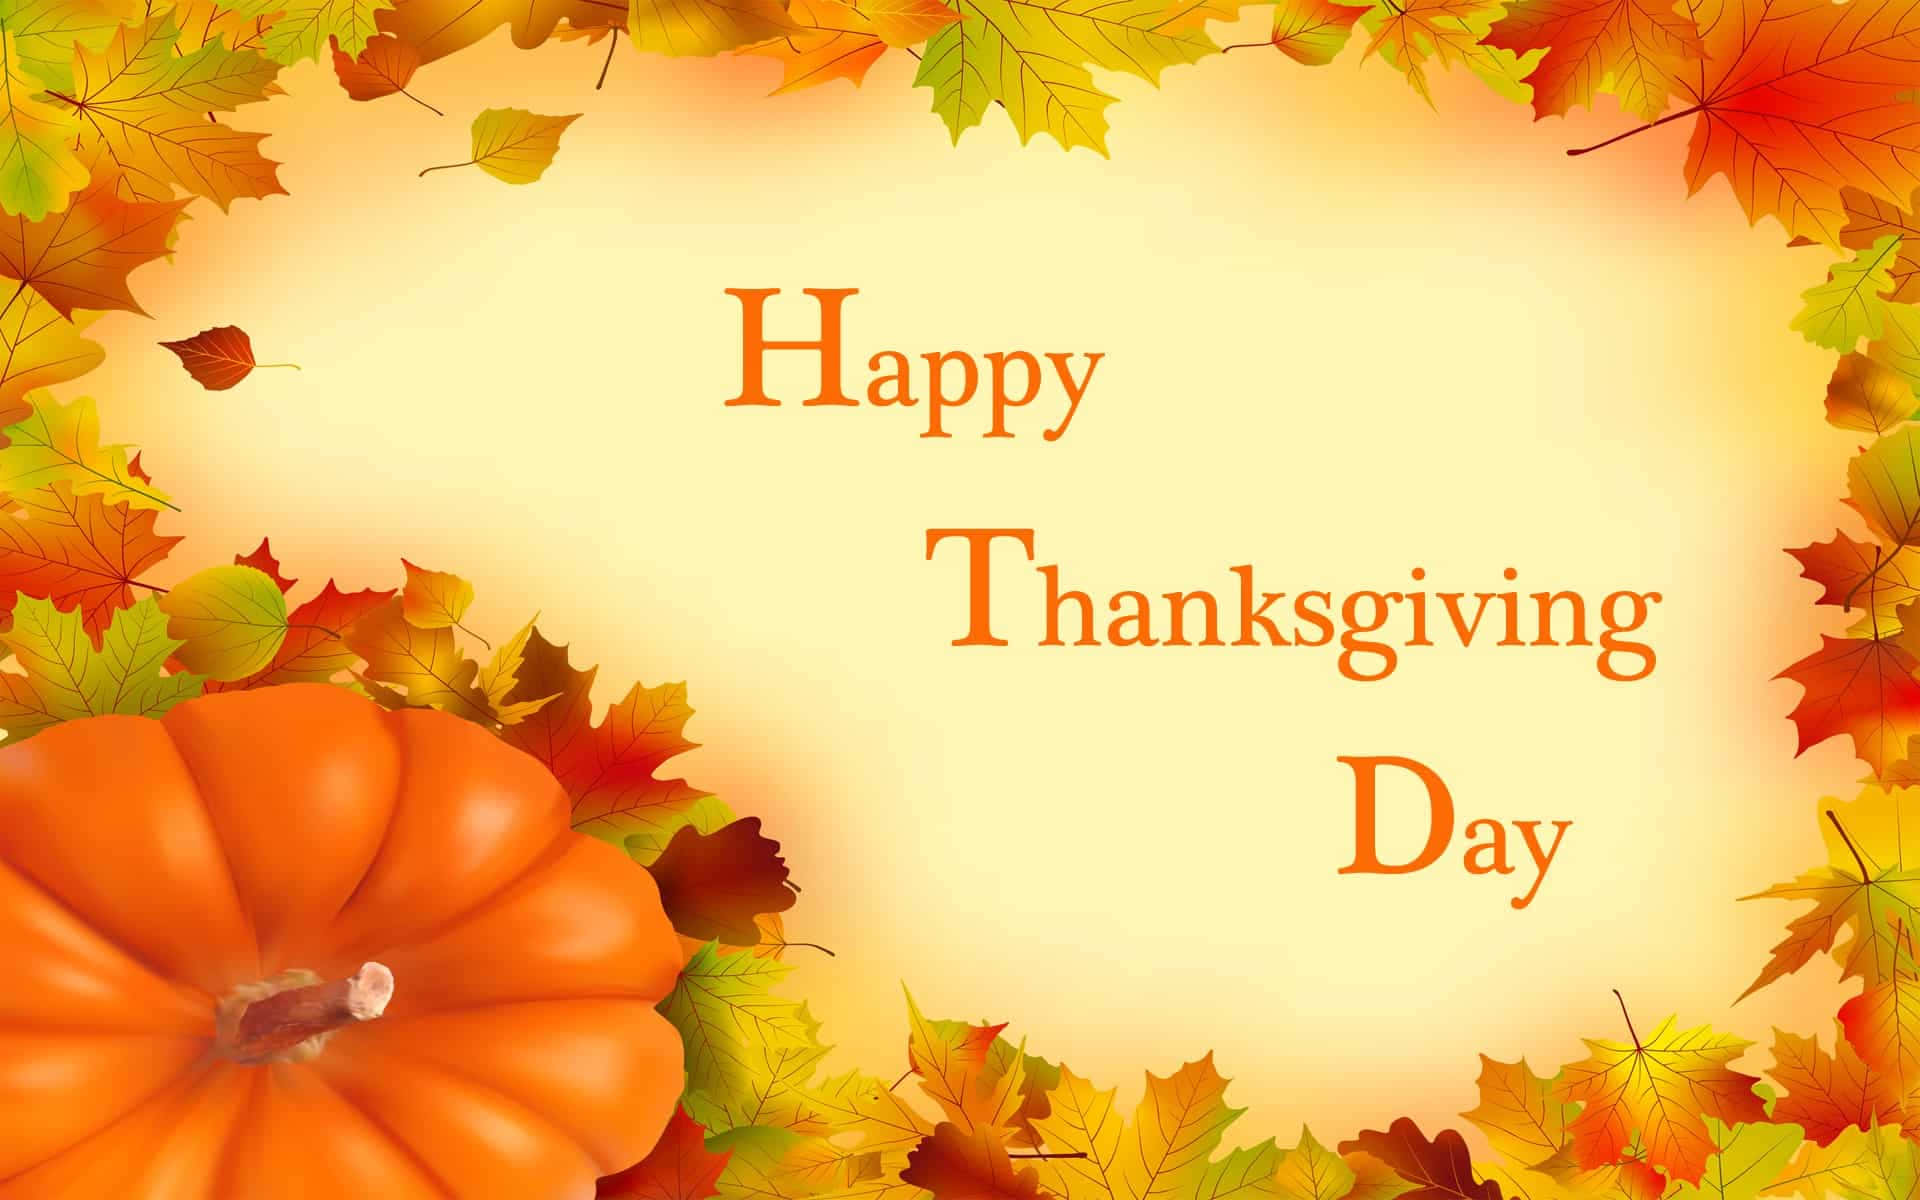 Celebrate the day of giving thanks with a feast of Thanksgiving food. Wallpaper